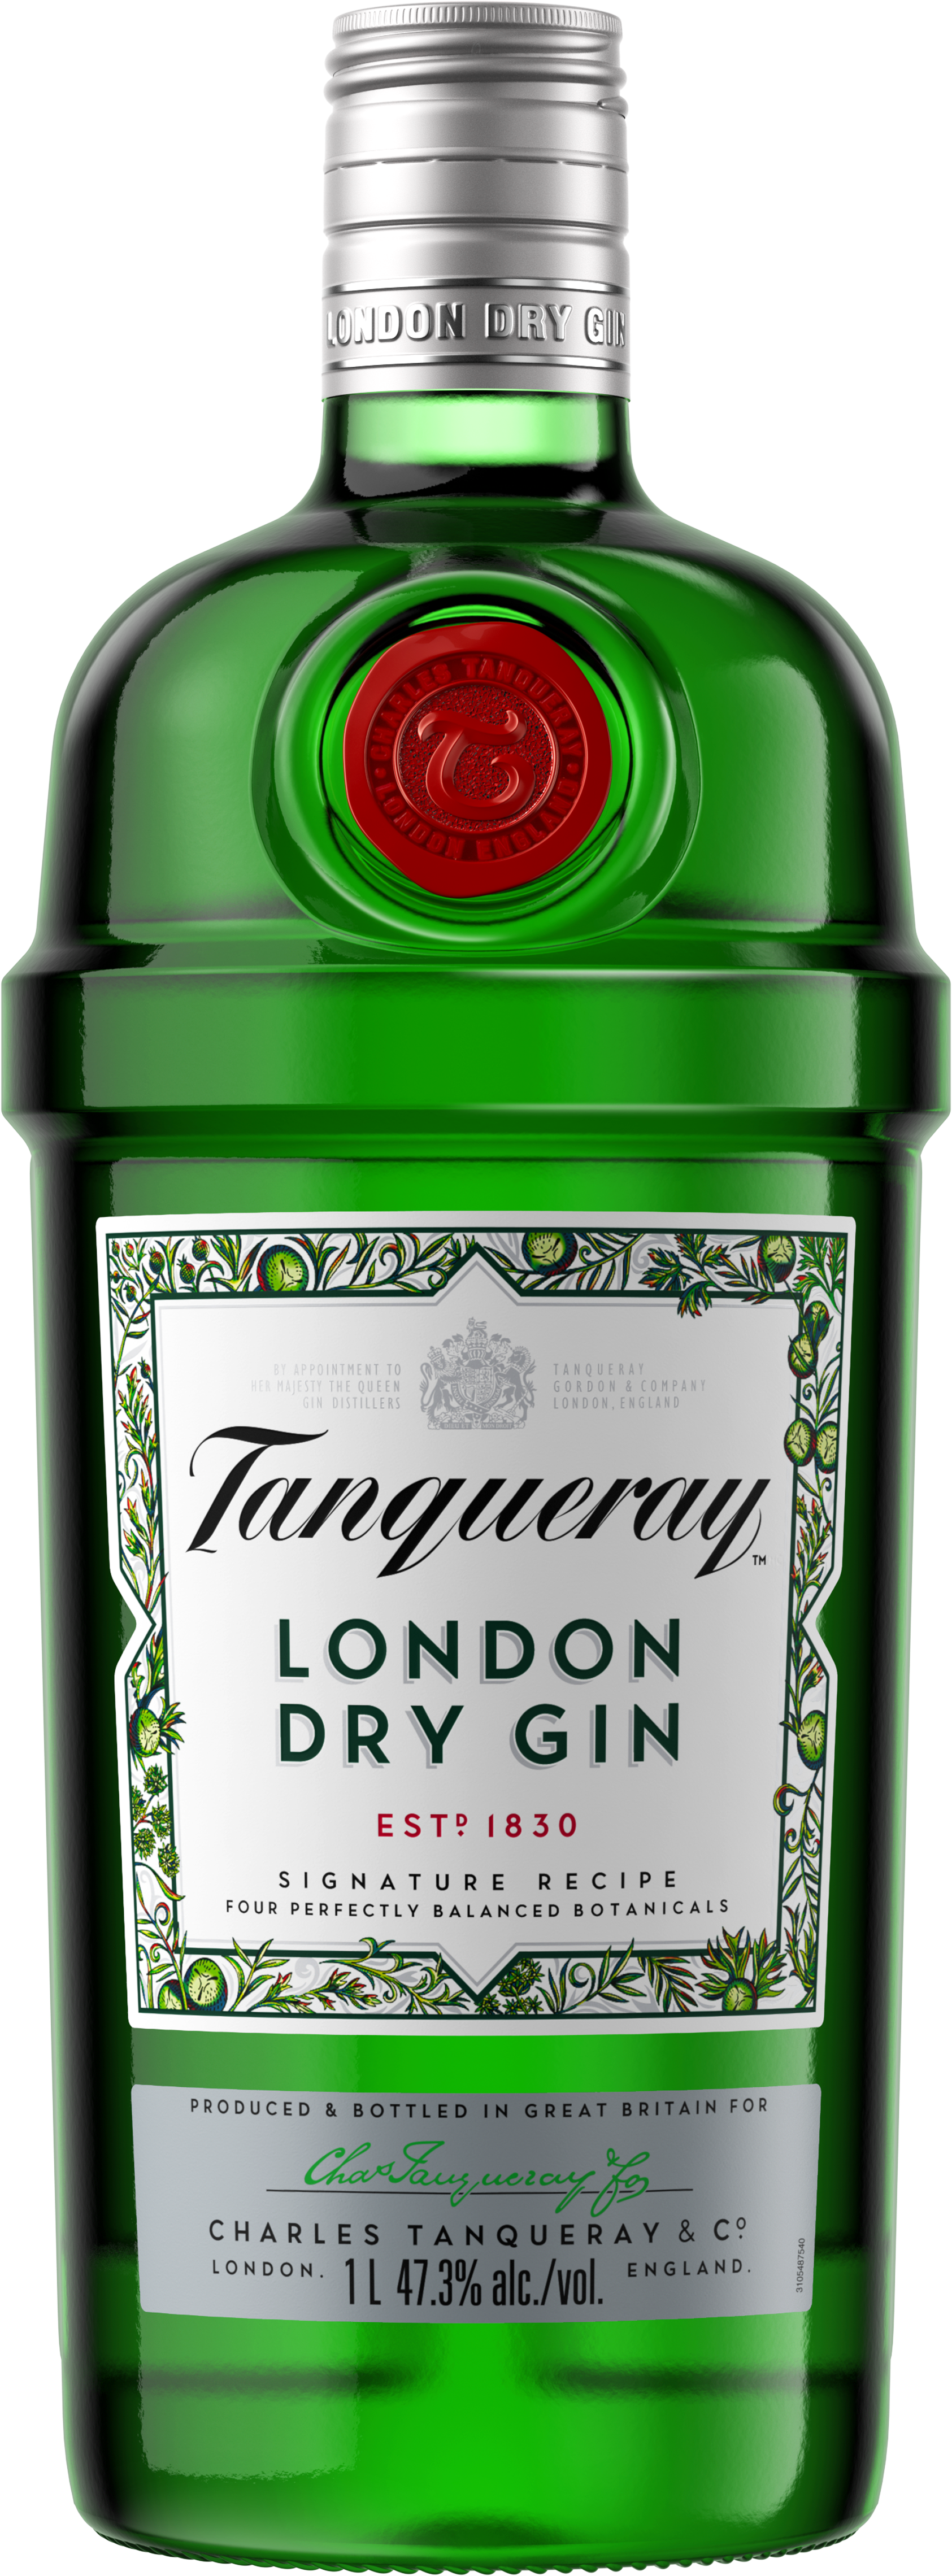 Tanqueray London Dry Gin 0,7 photo 1